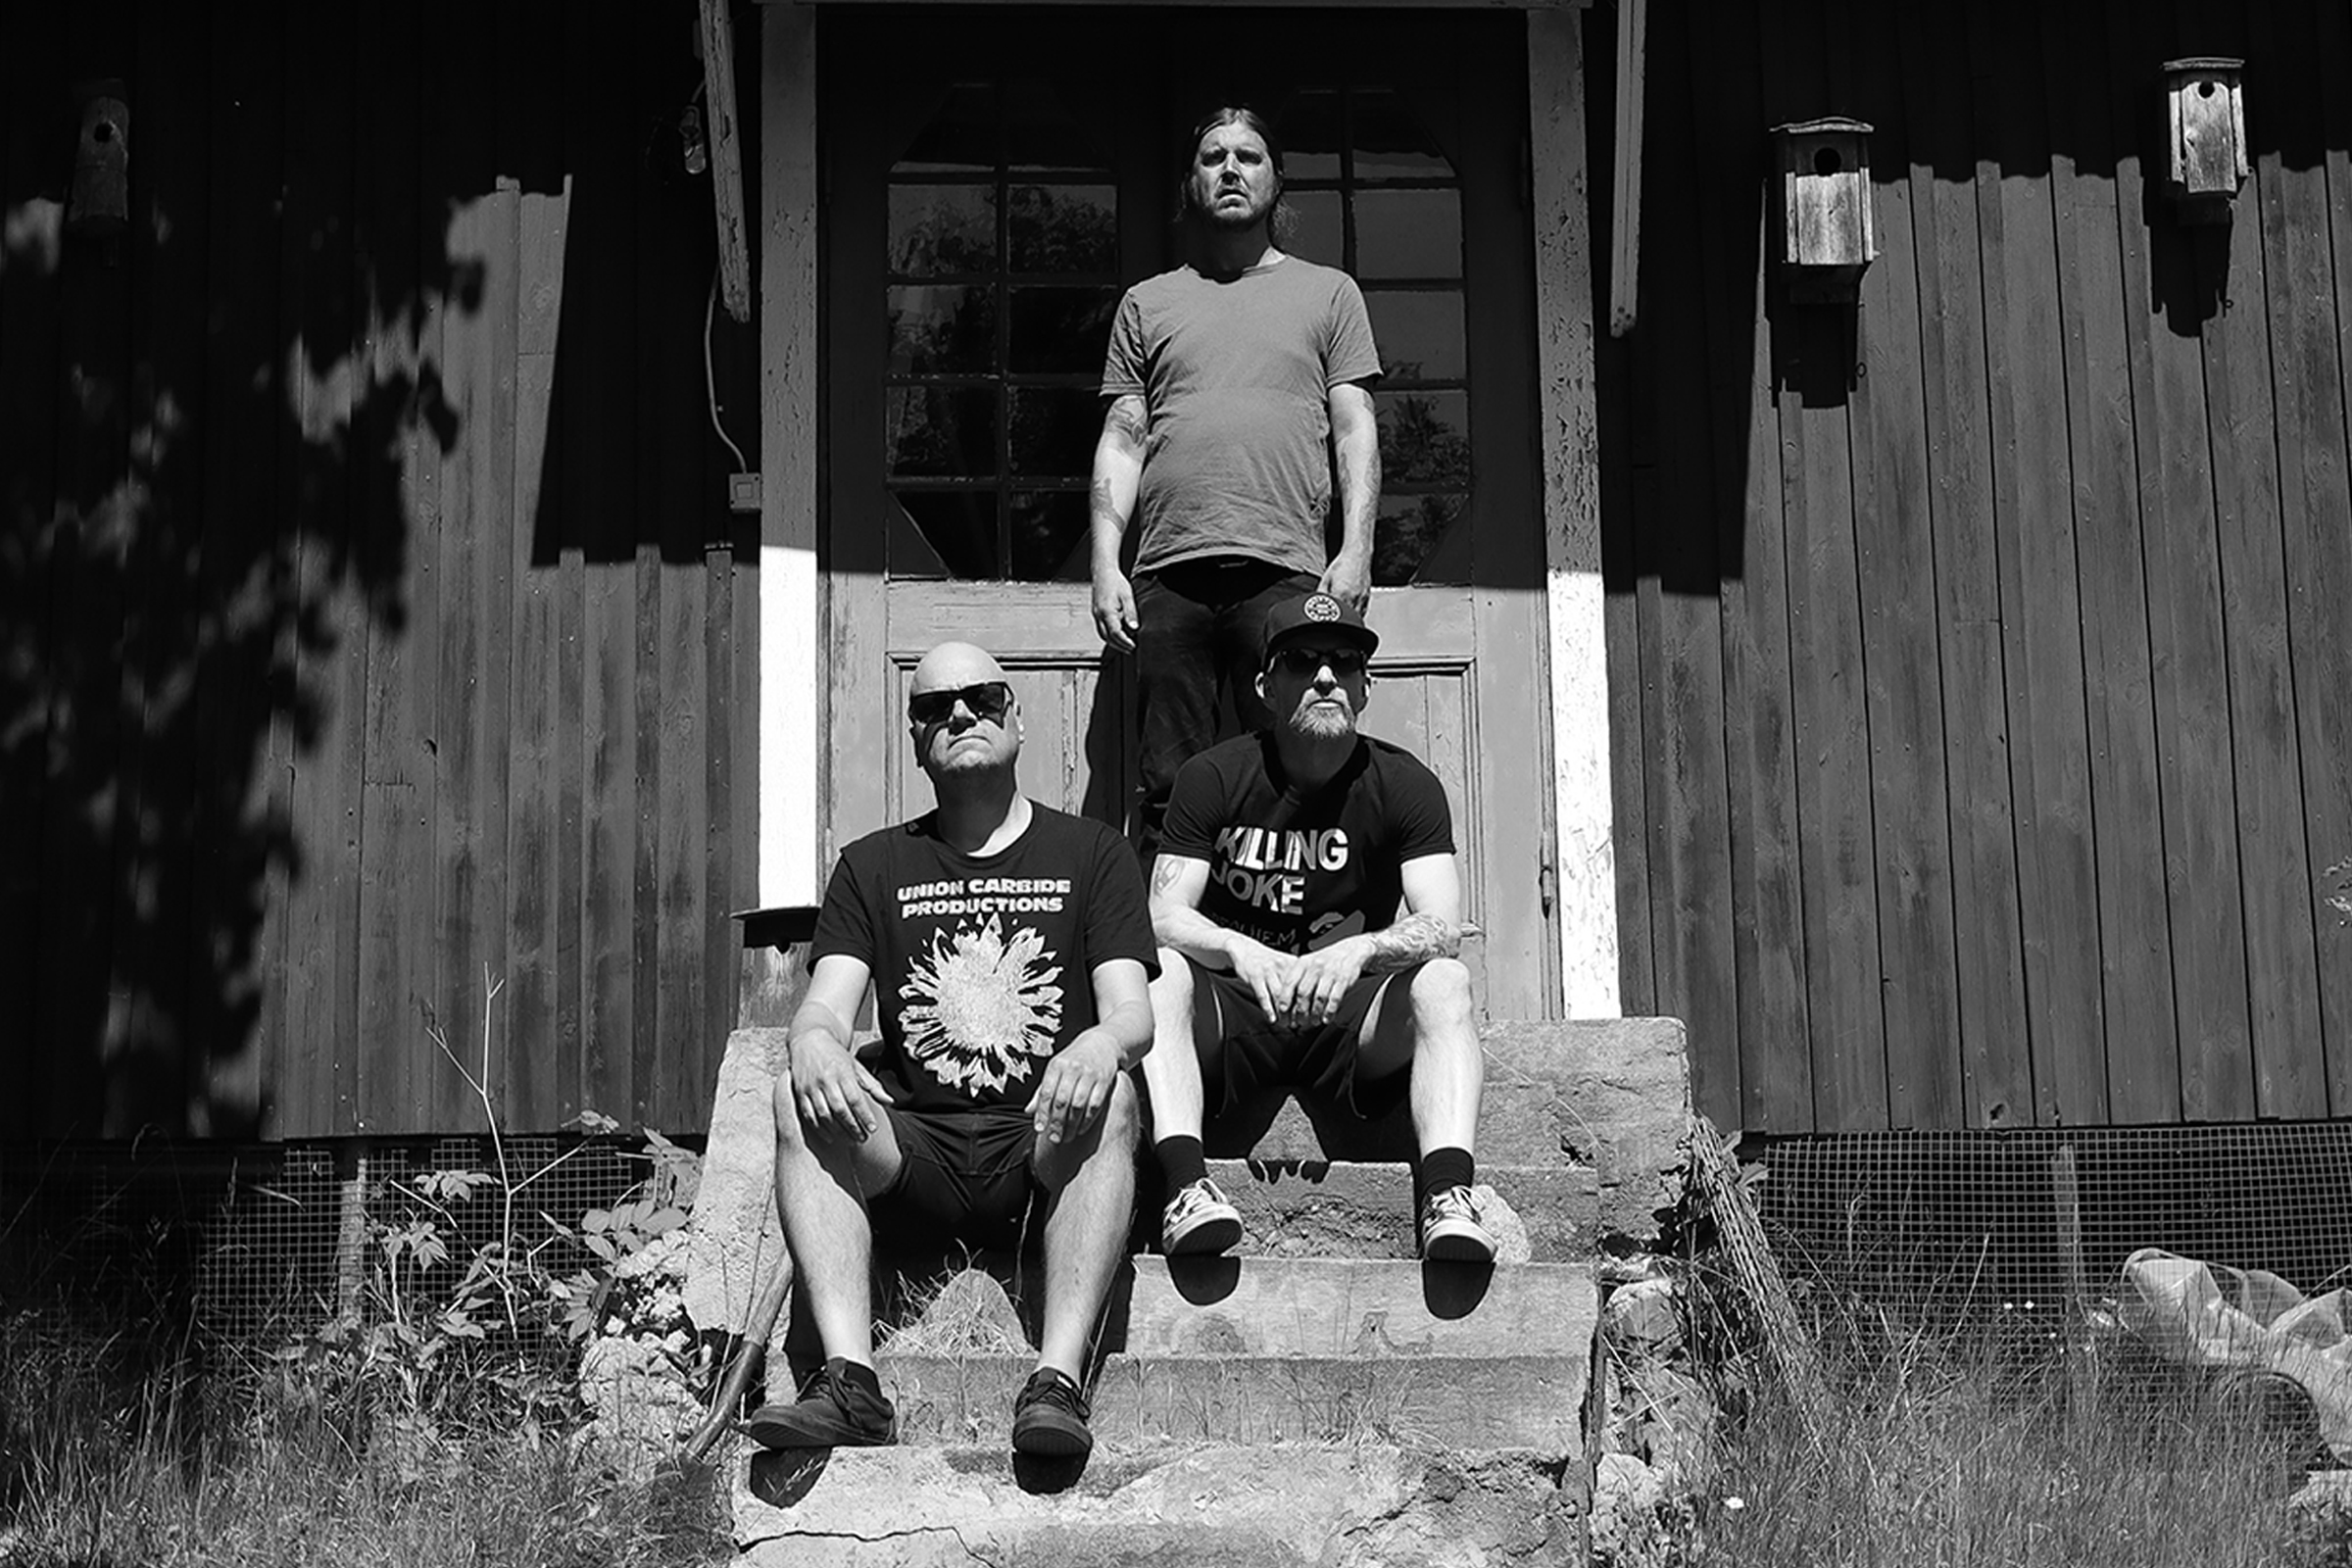 Black and white close-up photo of Haystack members at Studio Underjord: Ulf facing the camera in Union Carbide Productions shirt and sunglasses, Jonas in a Killing Joke t-shirt and baseball cap, Patrik partially visible behind them, all under midday sun shadows.